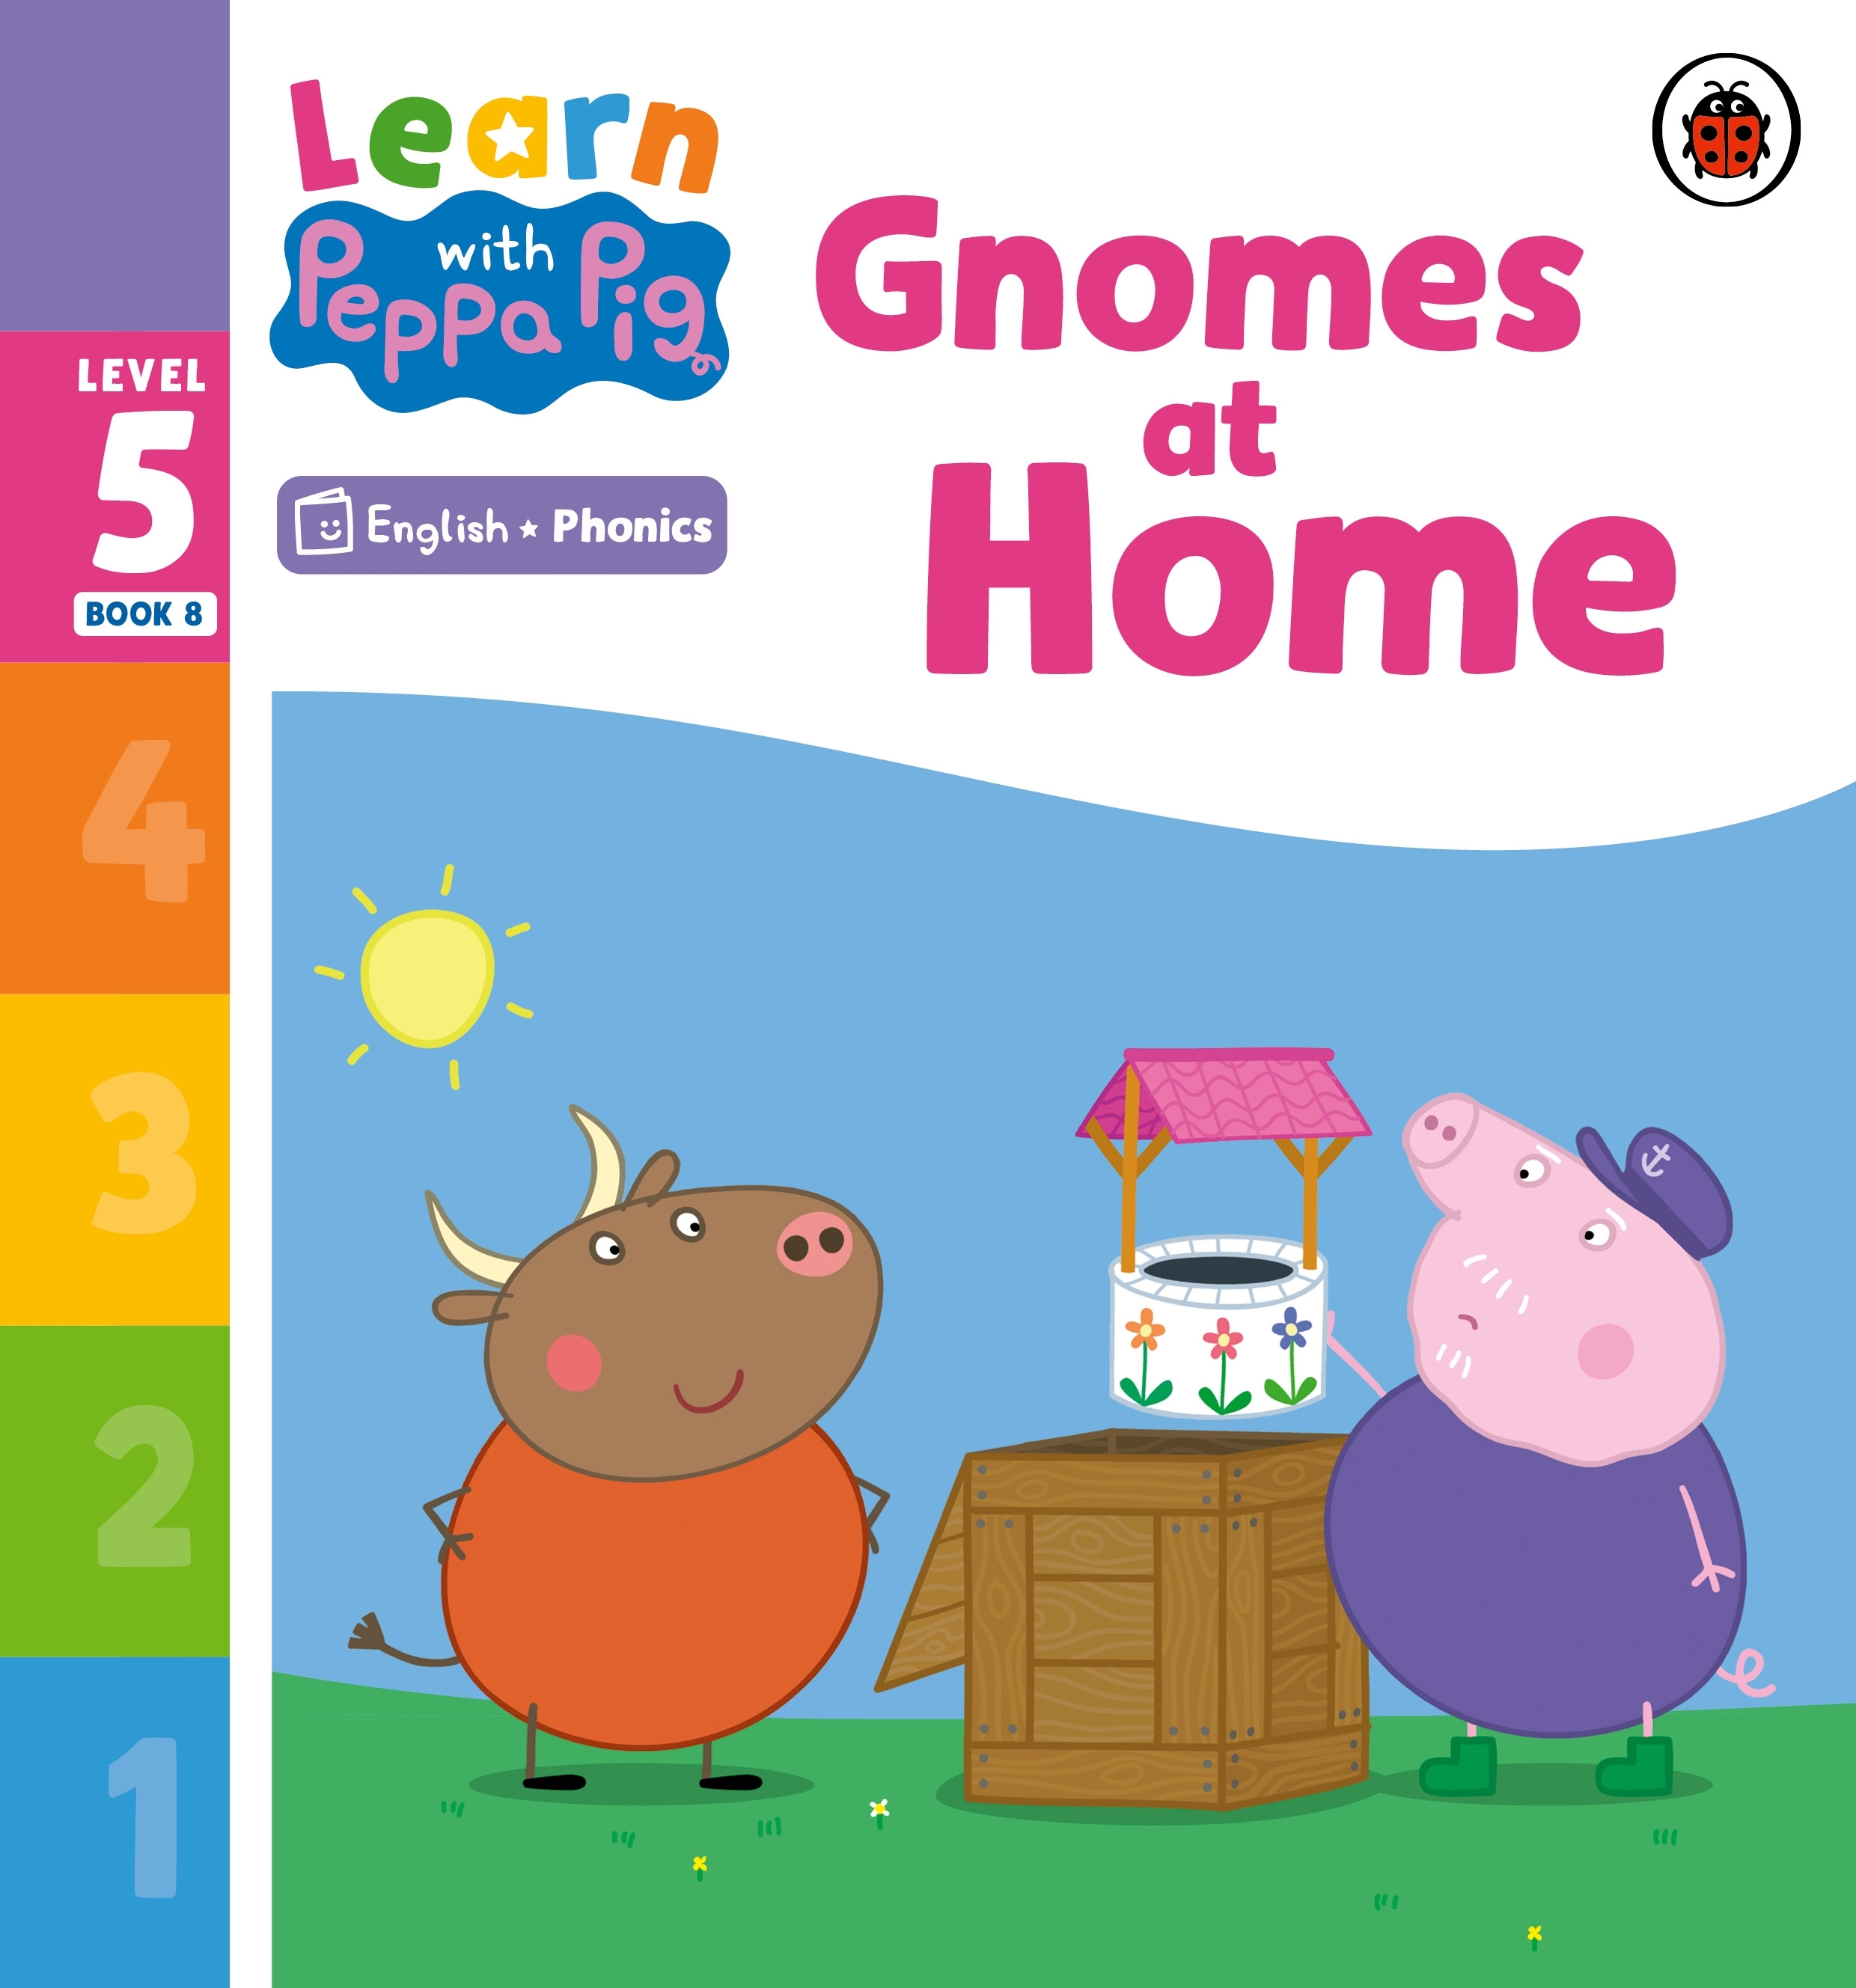 Learn with Peppa Phonics Level 5 Book 8 – Gnomes at Home (Phonics Reader) -  Penguin Books Australia